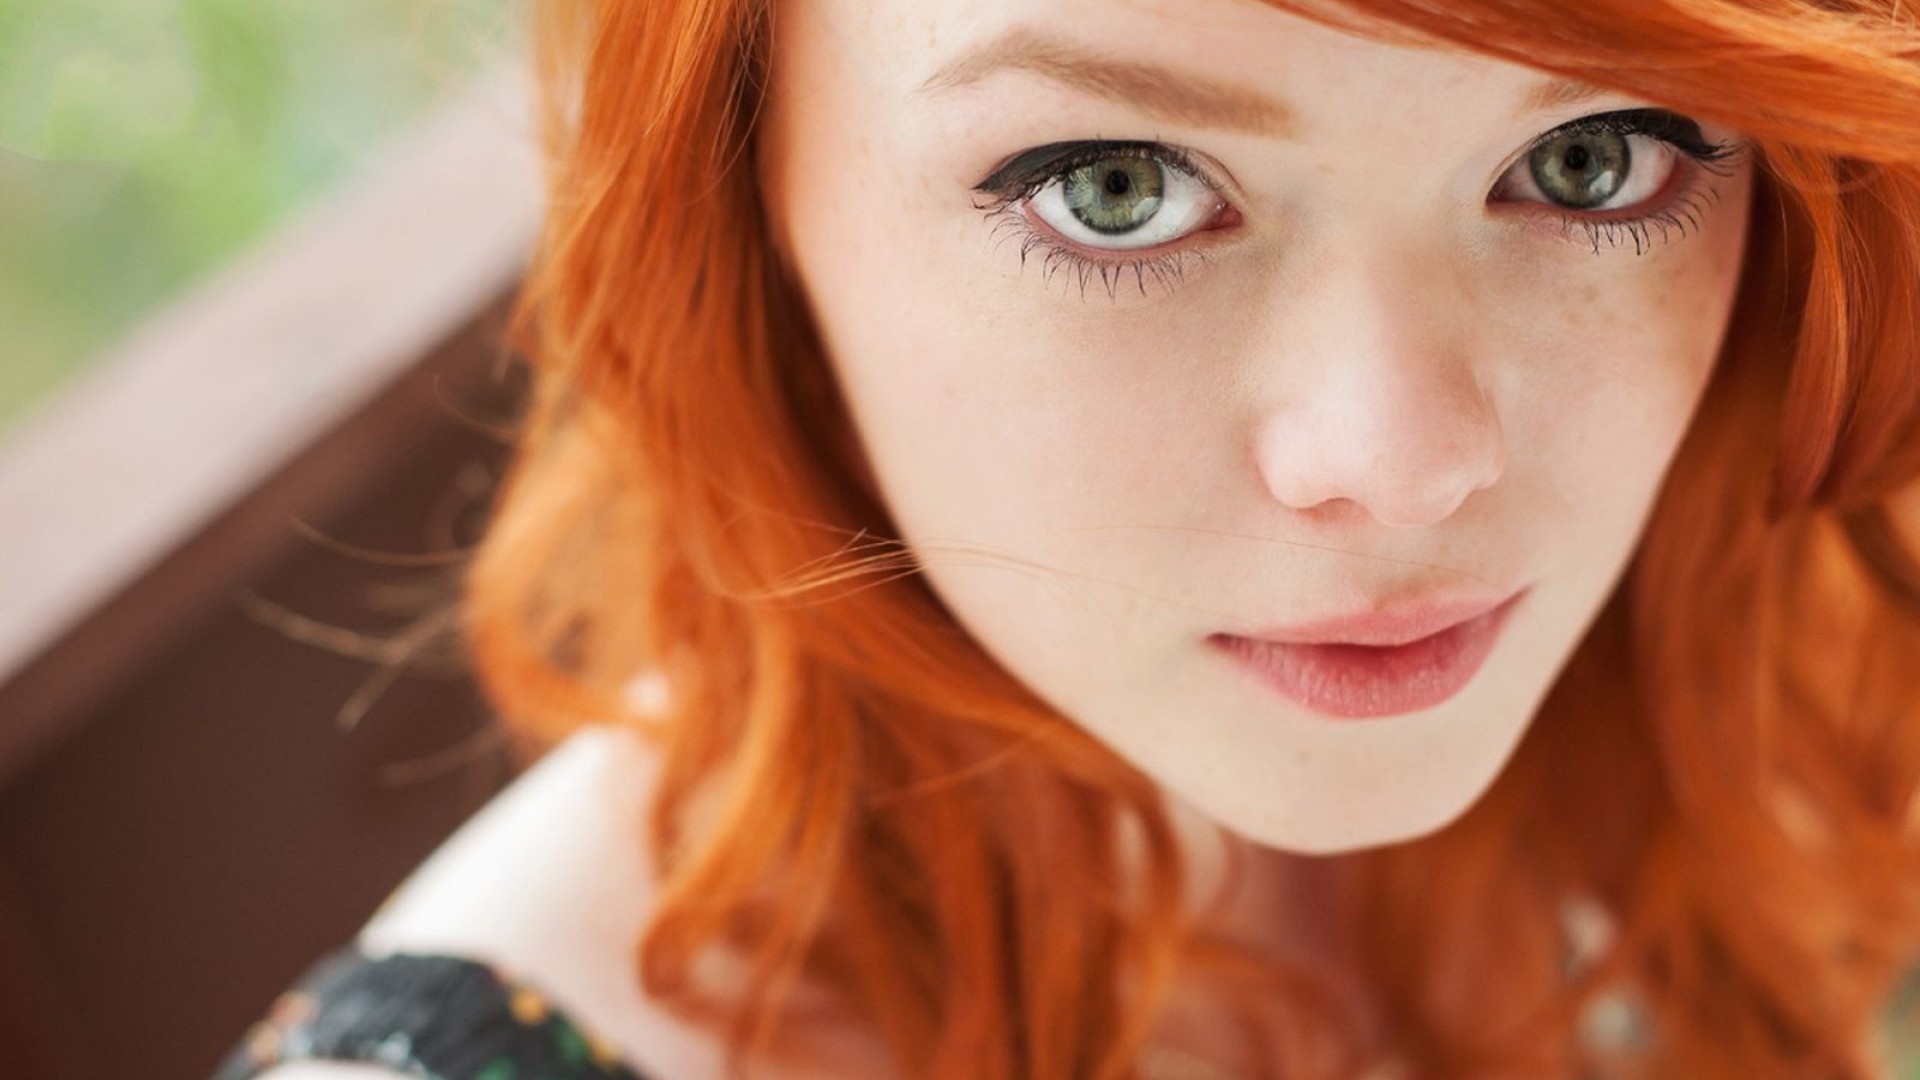 redhead women model face green eyes Wallpapers HD / Desktop and Mobile